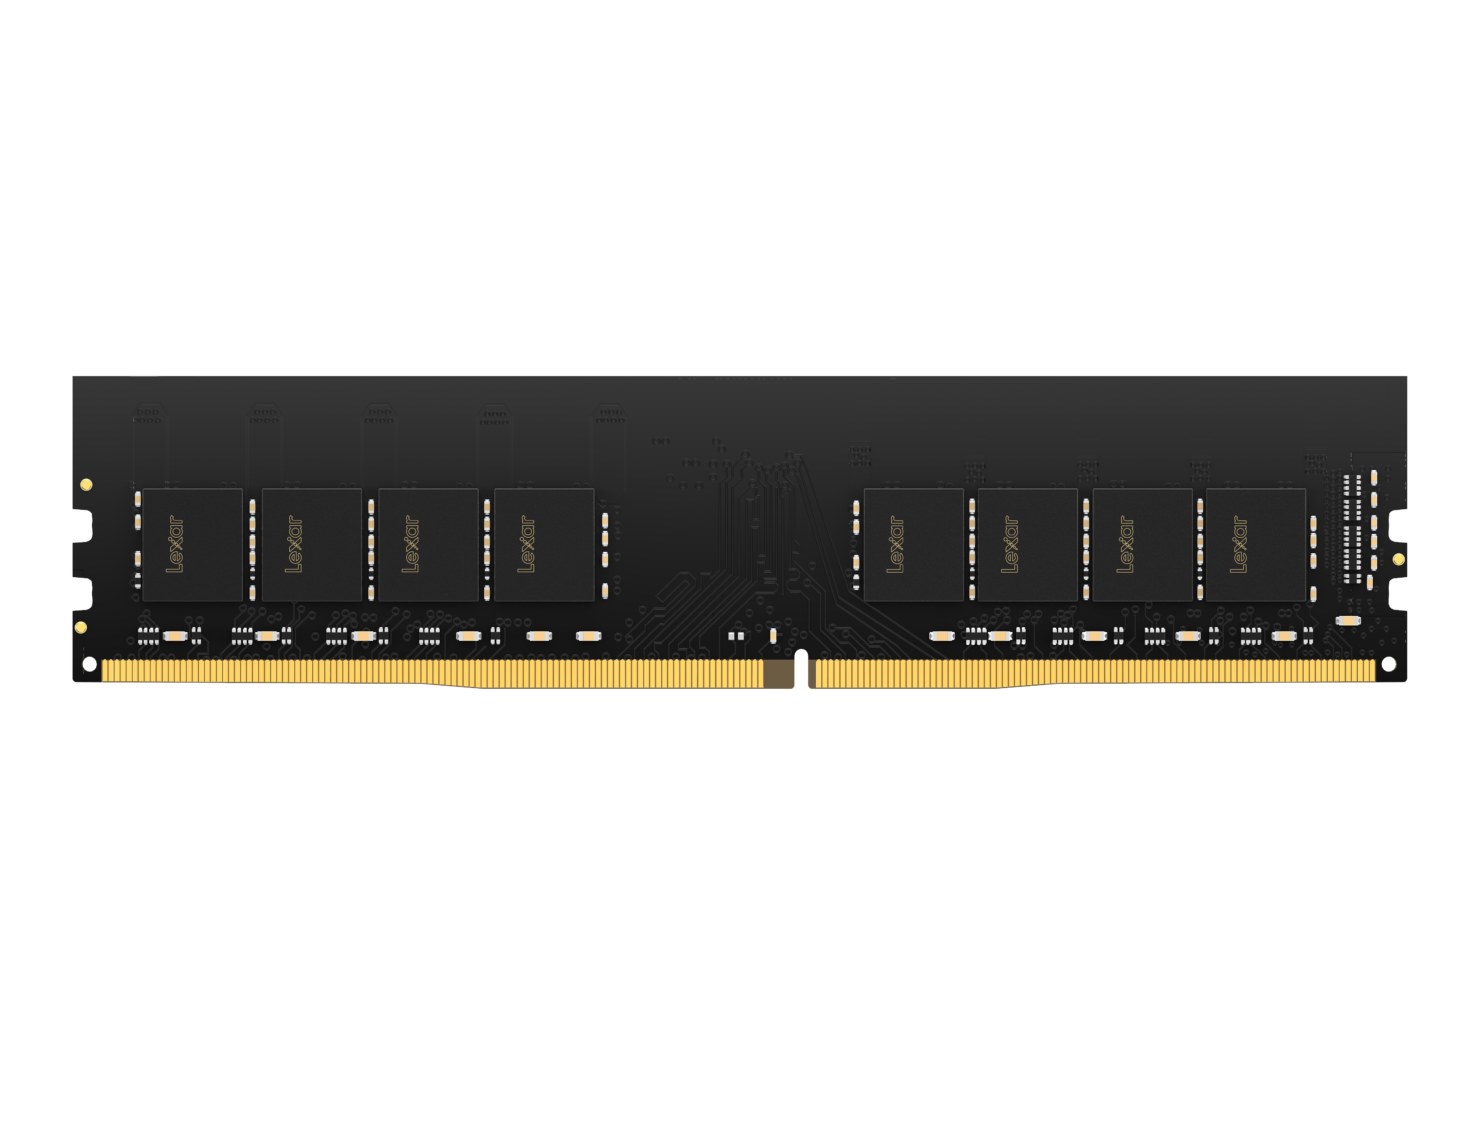 20200620.Lexar-Enters-The-DRAM-Market-With-The-DDR4-2666-SODIMM-Laptop-Memory-And-DDR4-2666-UDIMM-Desktop-Memory-06.png